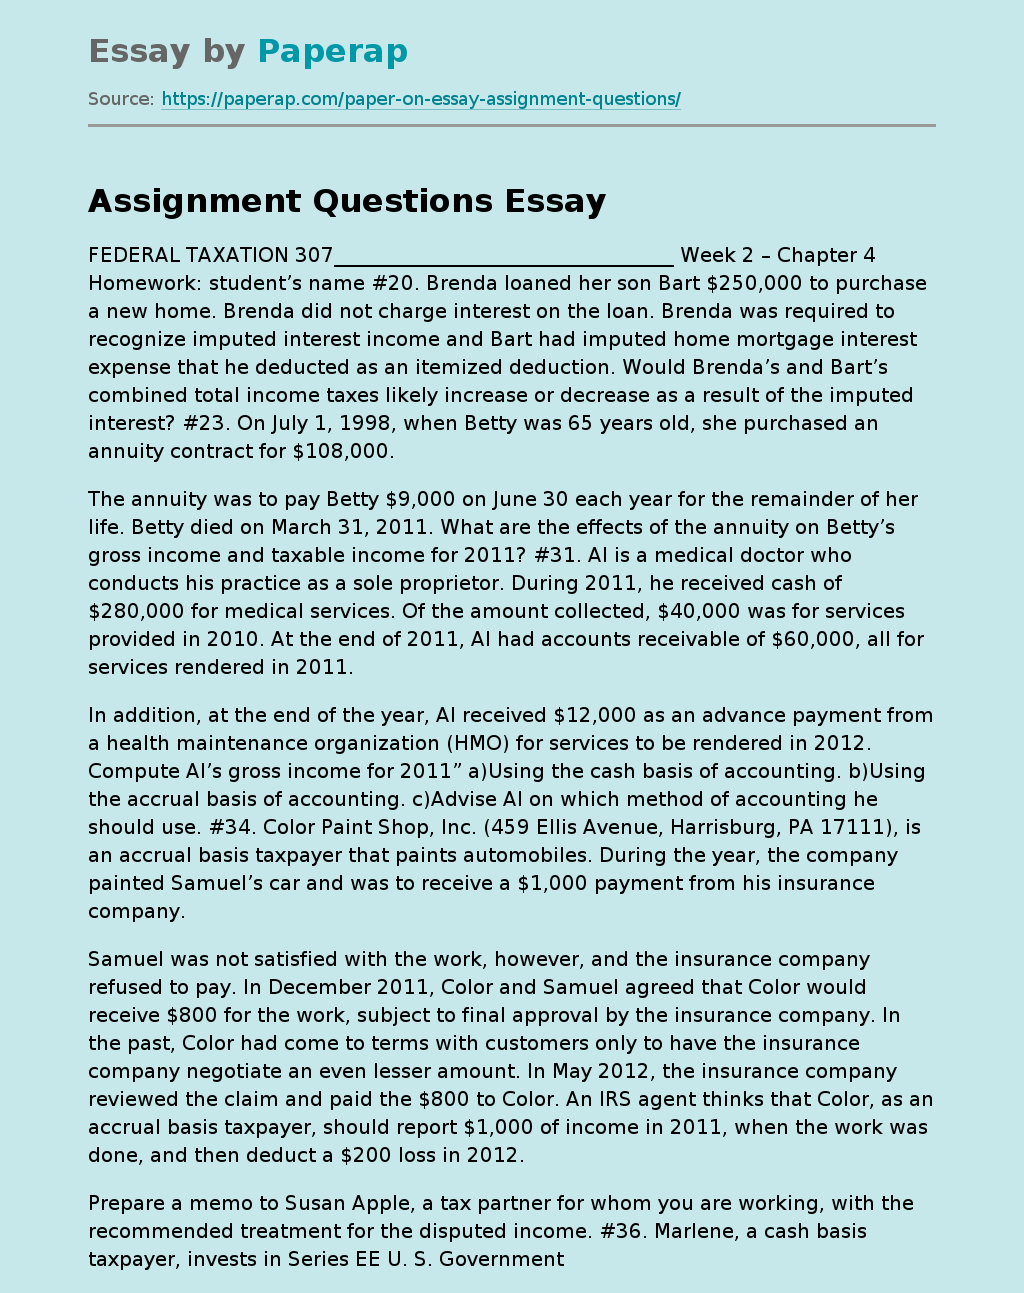 Assignment Questions